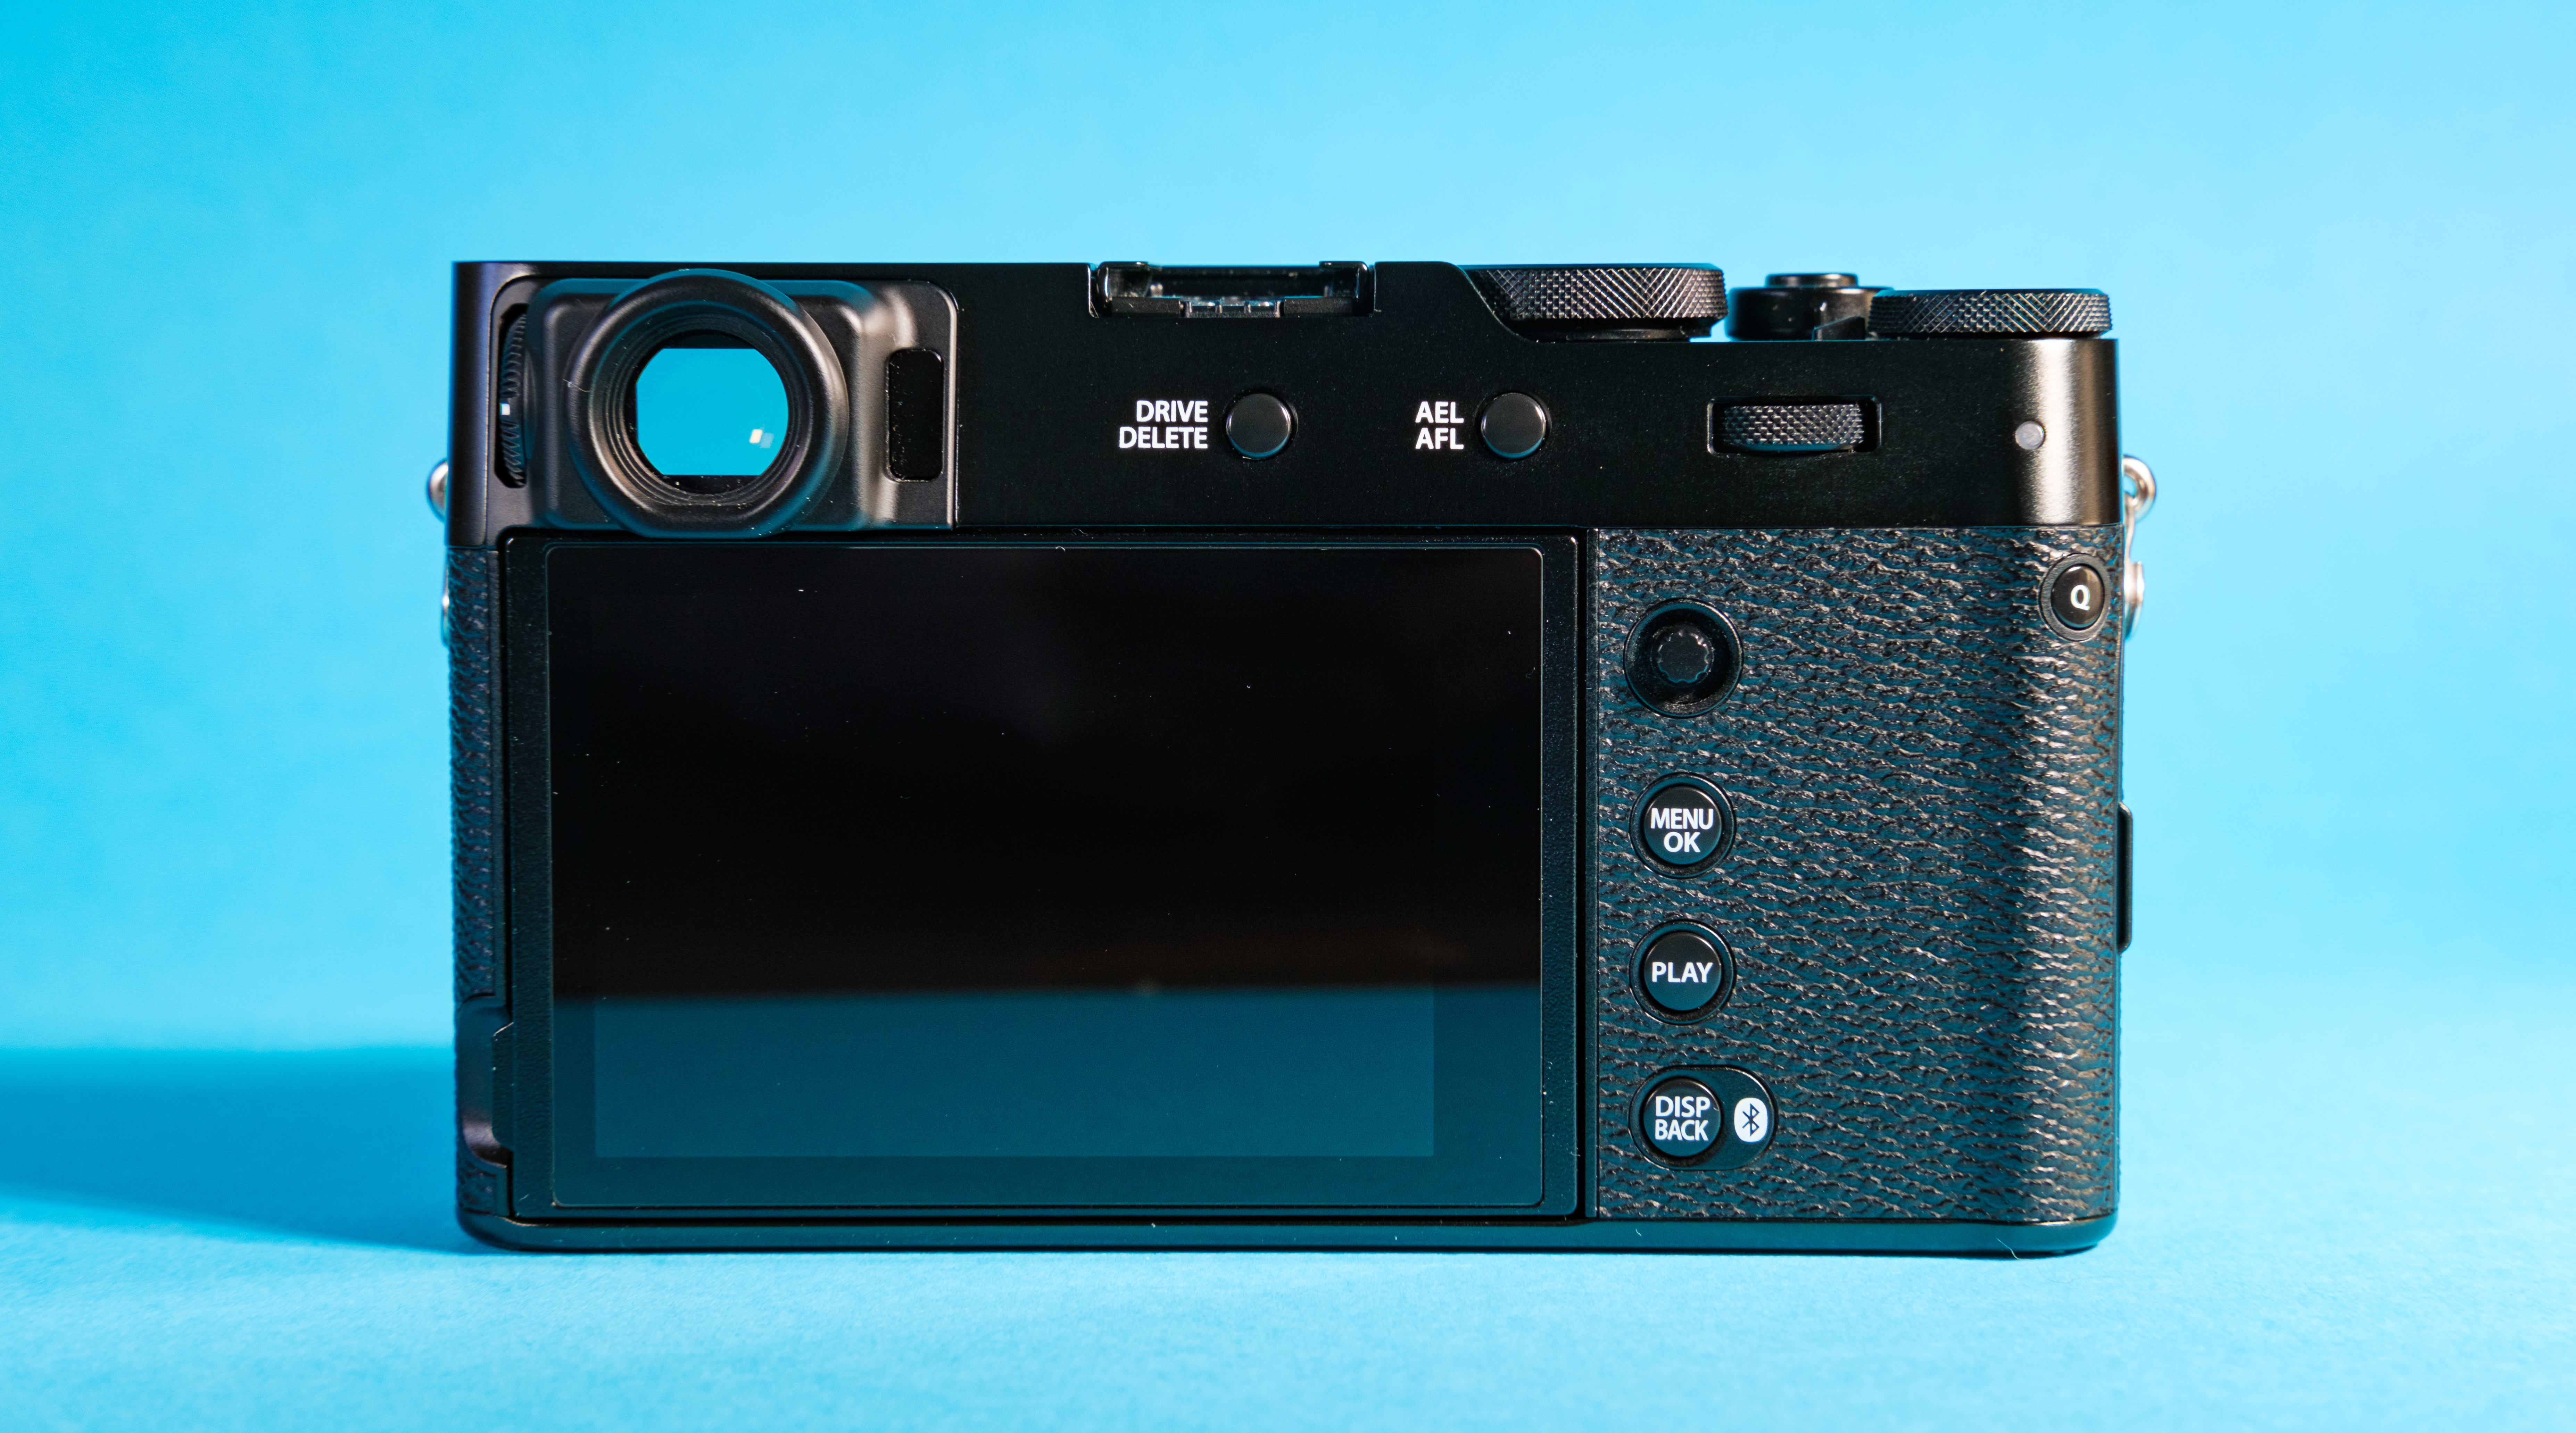 The Fujifilm X100VI mirrorless camera against a blue background  with the rear screen showing.